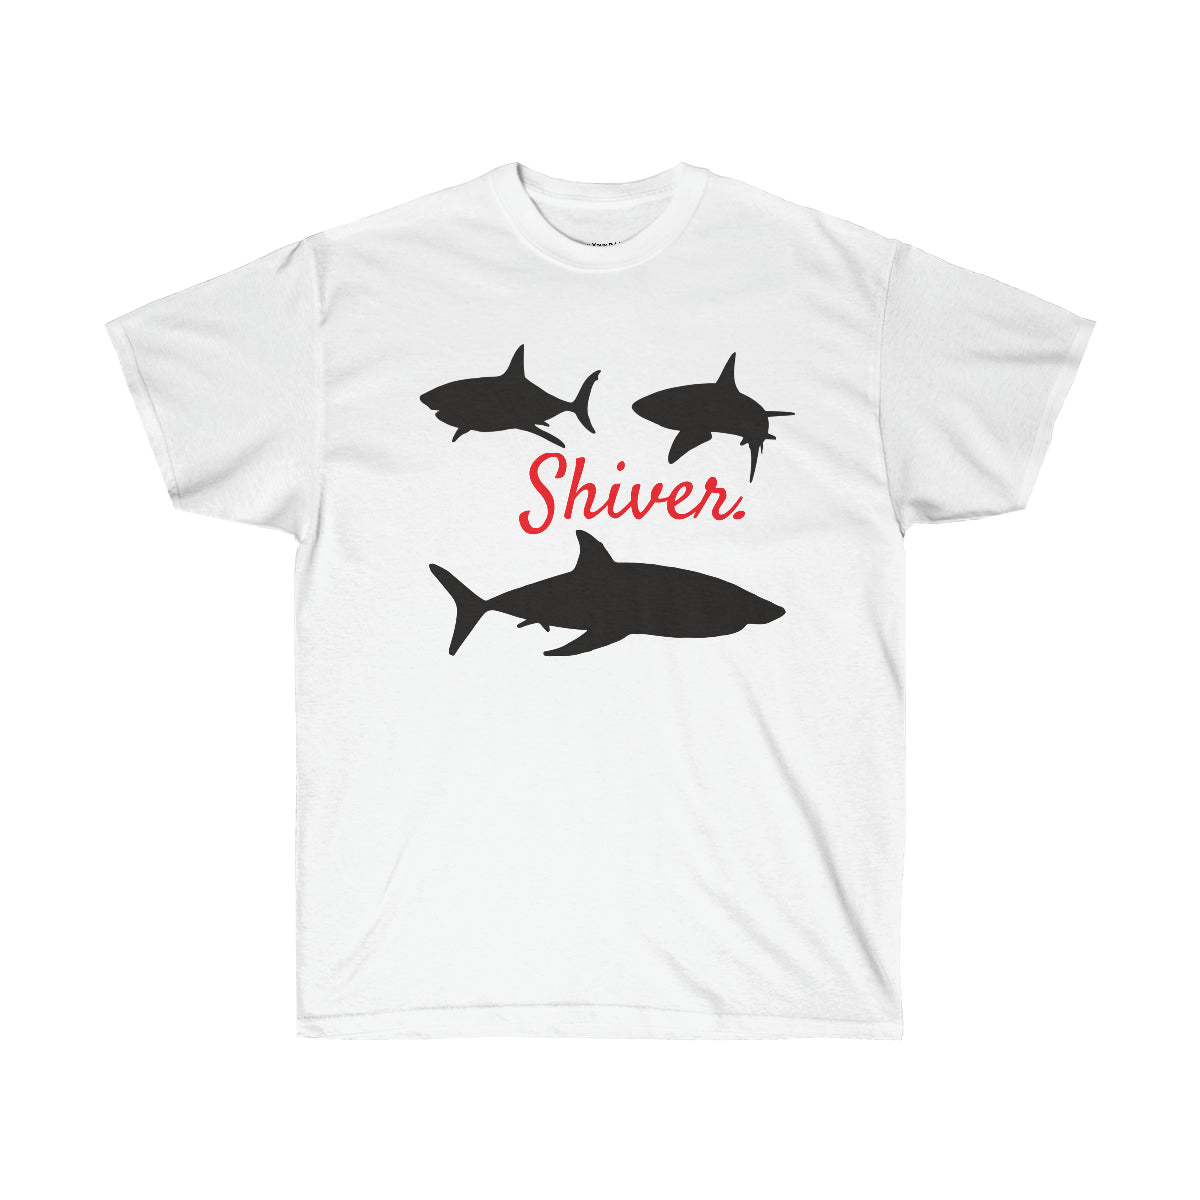 Shiver of Sharks Aquarium of the Pacific T-shirt